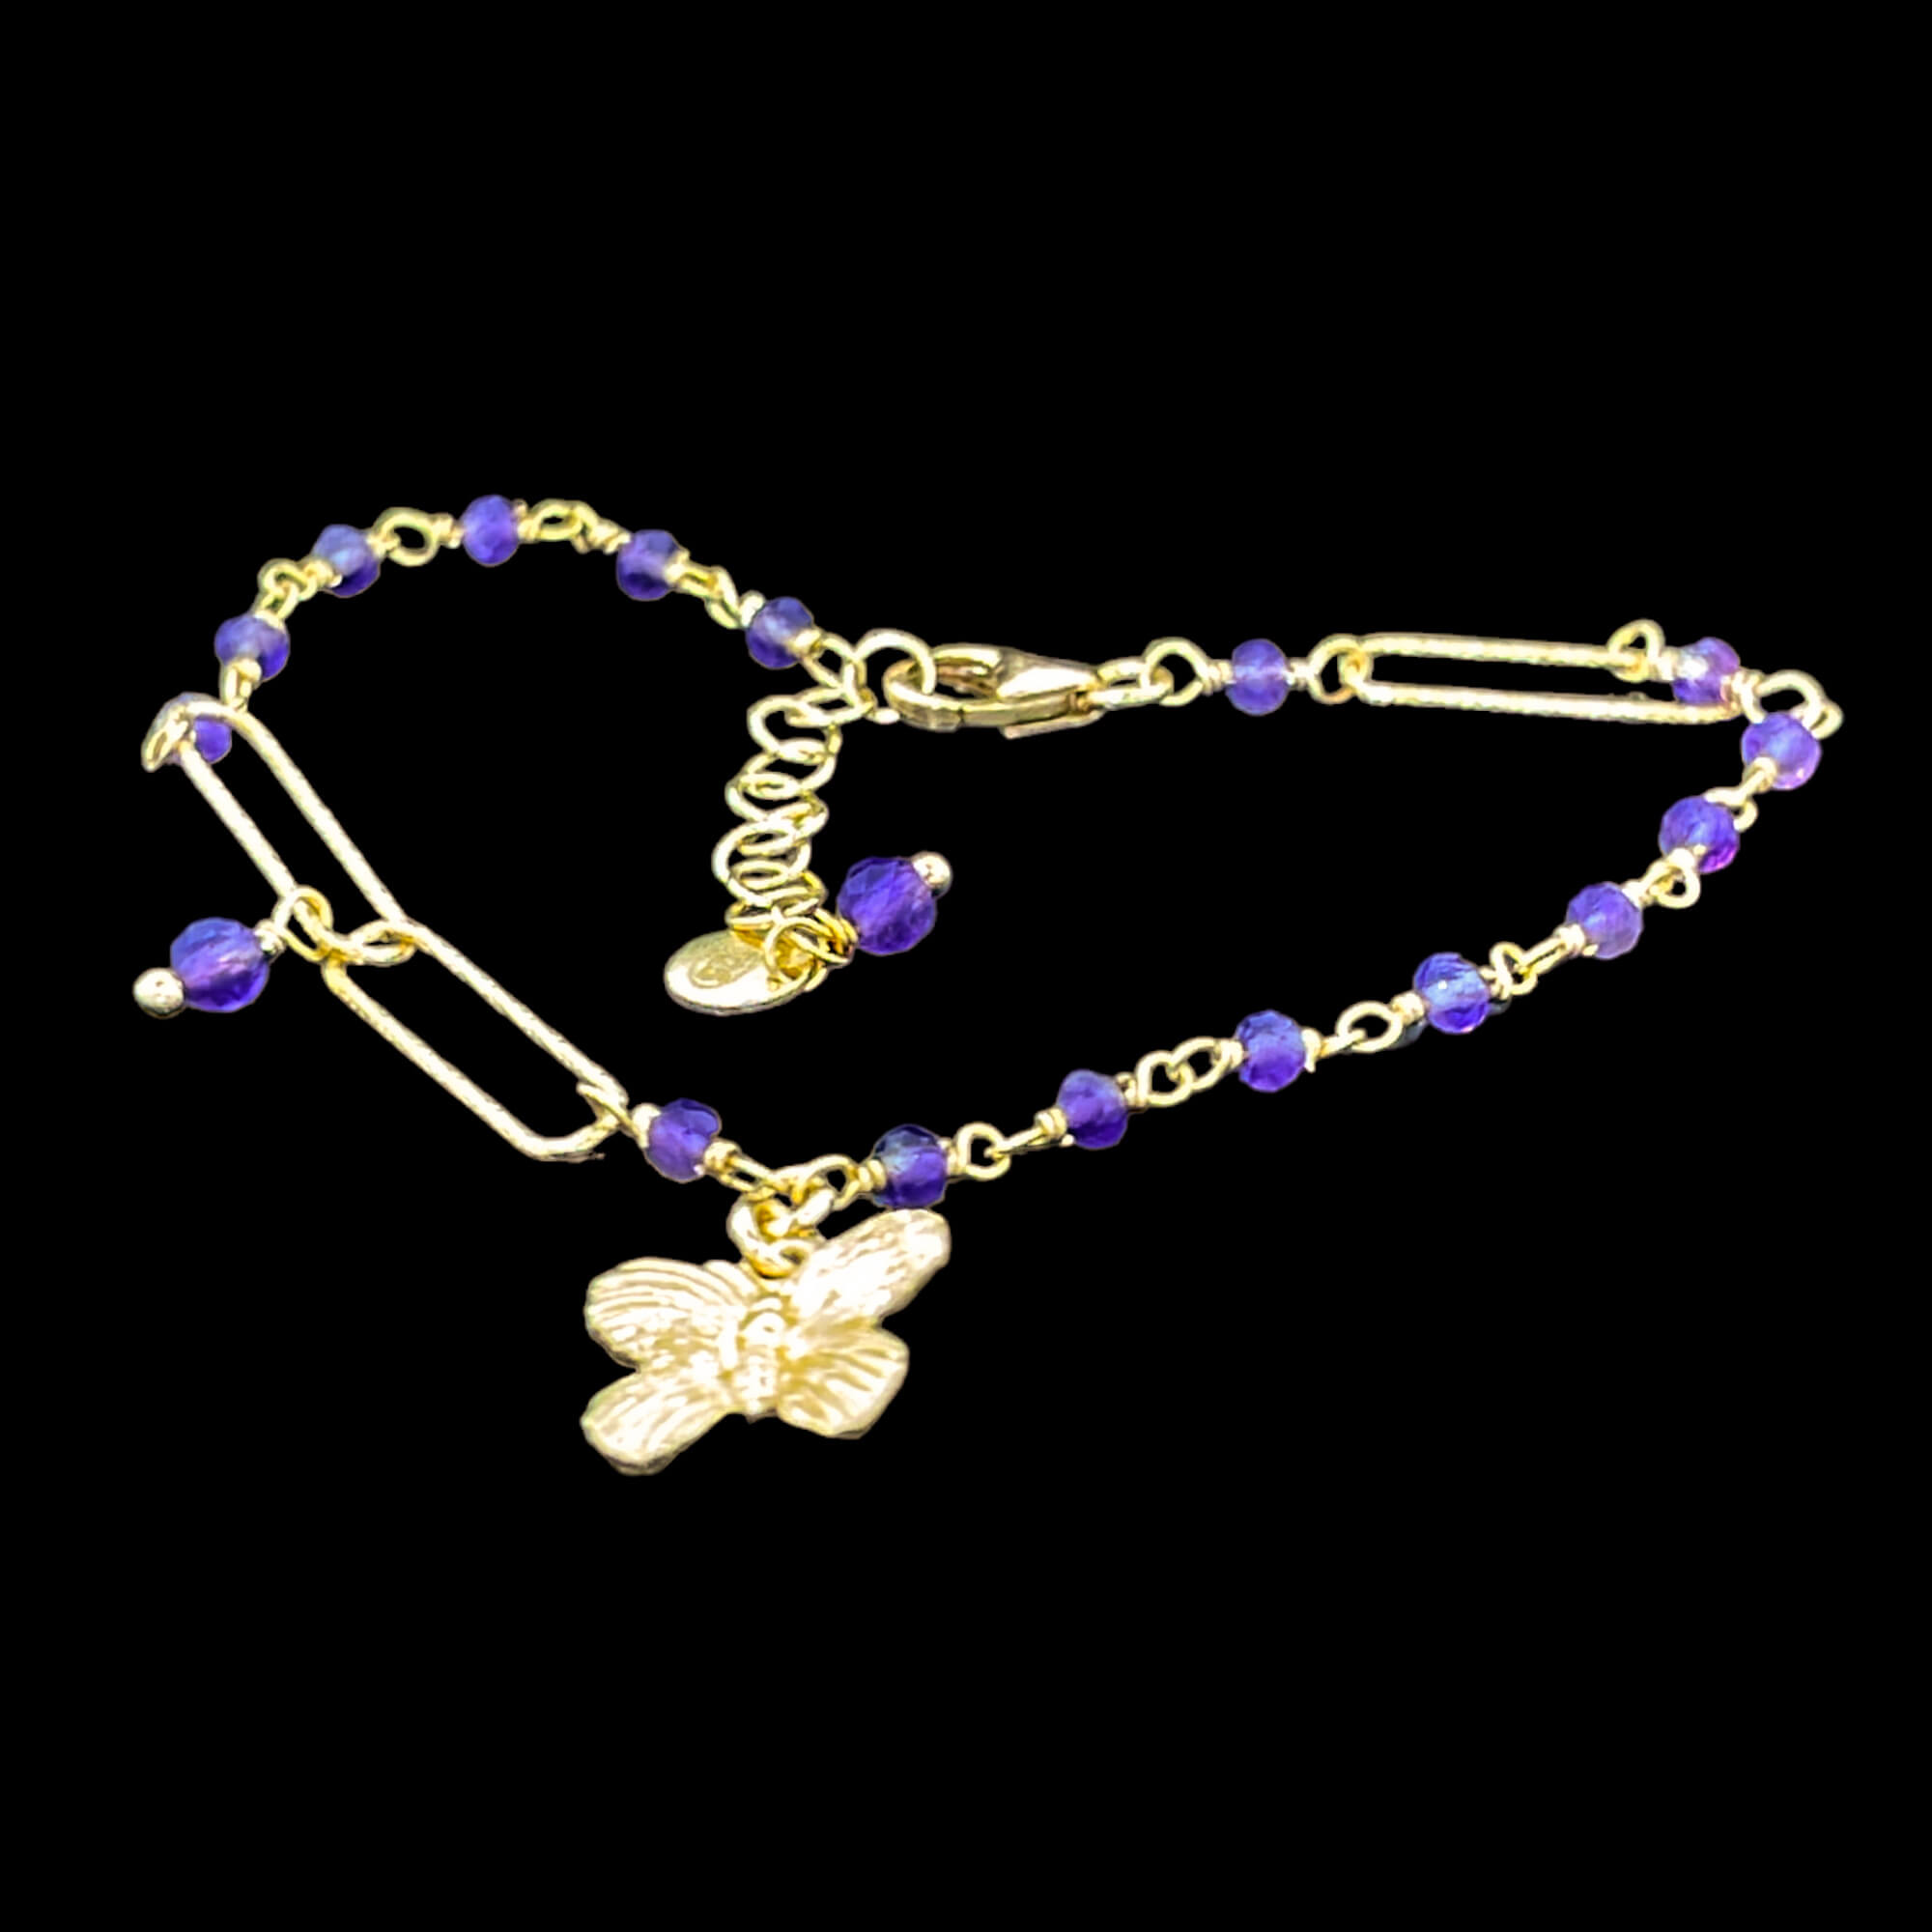 Gold-plated bracelet with amethyst stones and a butterfly